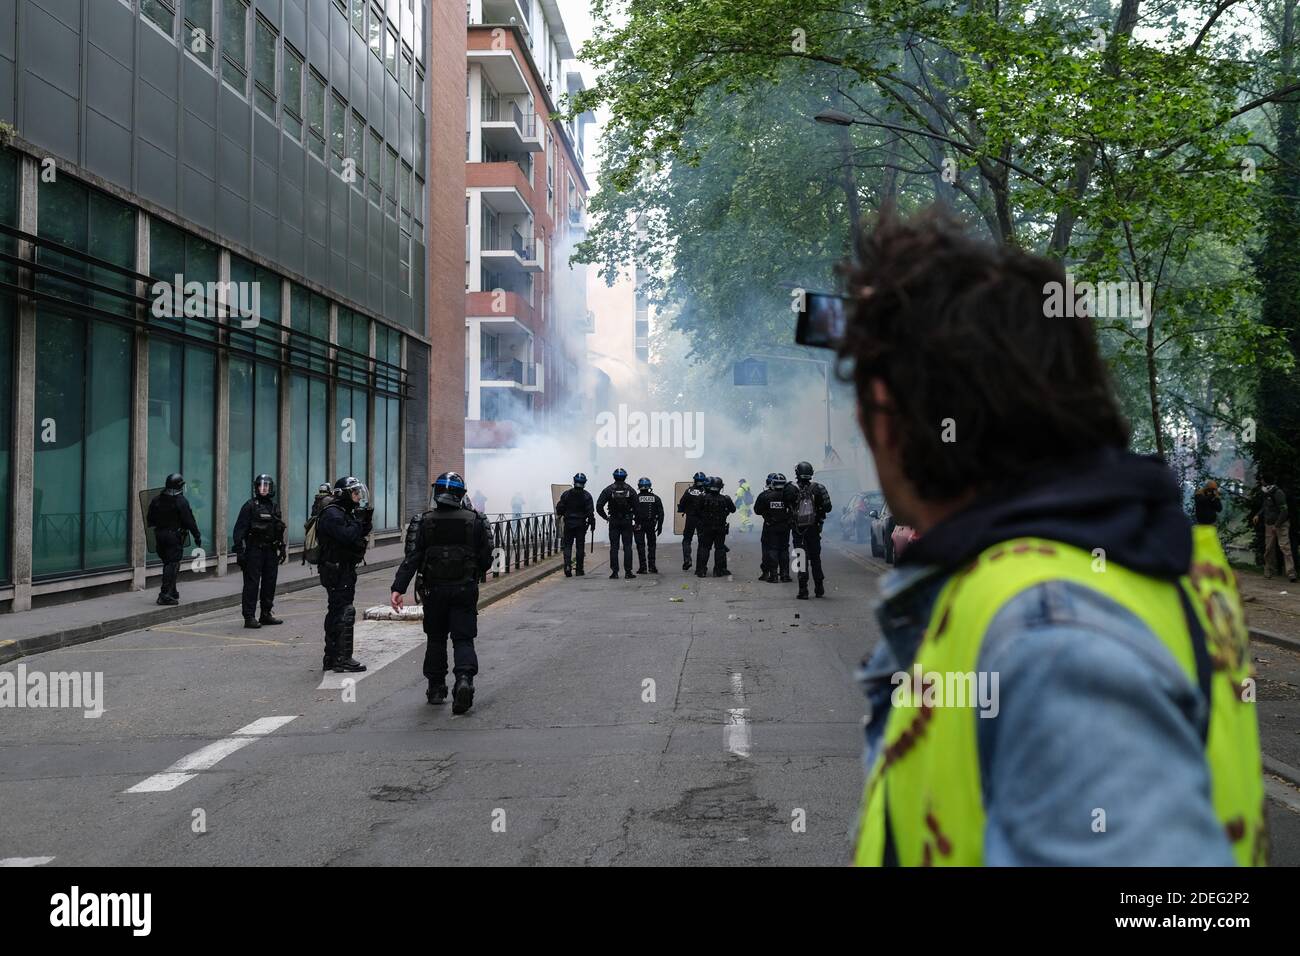 Cord of policemen in front of teargas cloud. For the 24th consecutive Saturday, the Gilets Jaunes (Yellow Vests) demonstrated in the streets of Toulouse (France), April 27, 2019. Photo by Patrick Batard / ABACAPRESS.COM Stock Photo